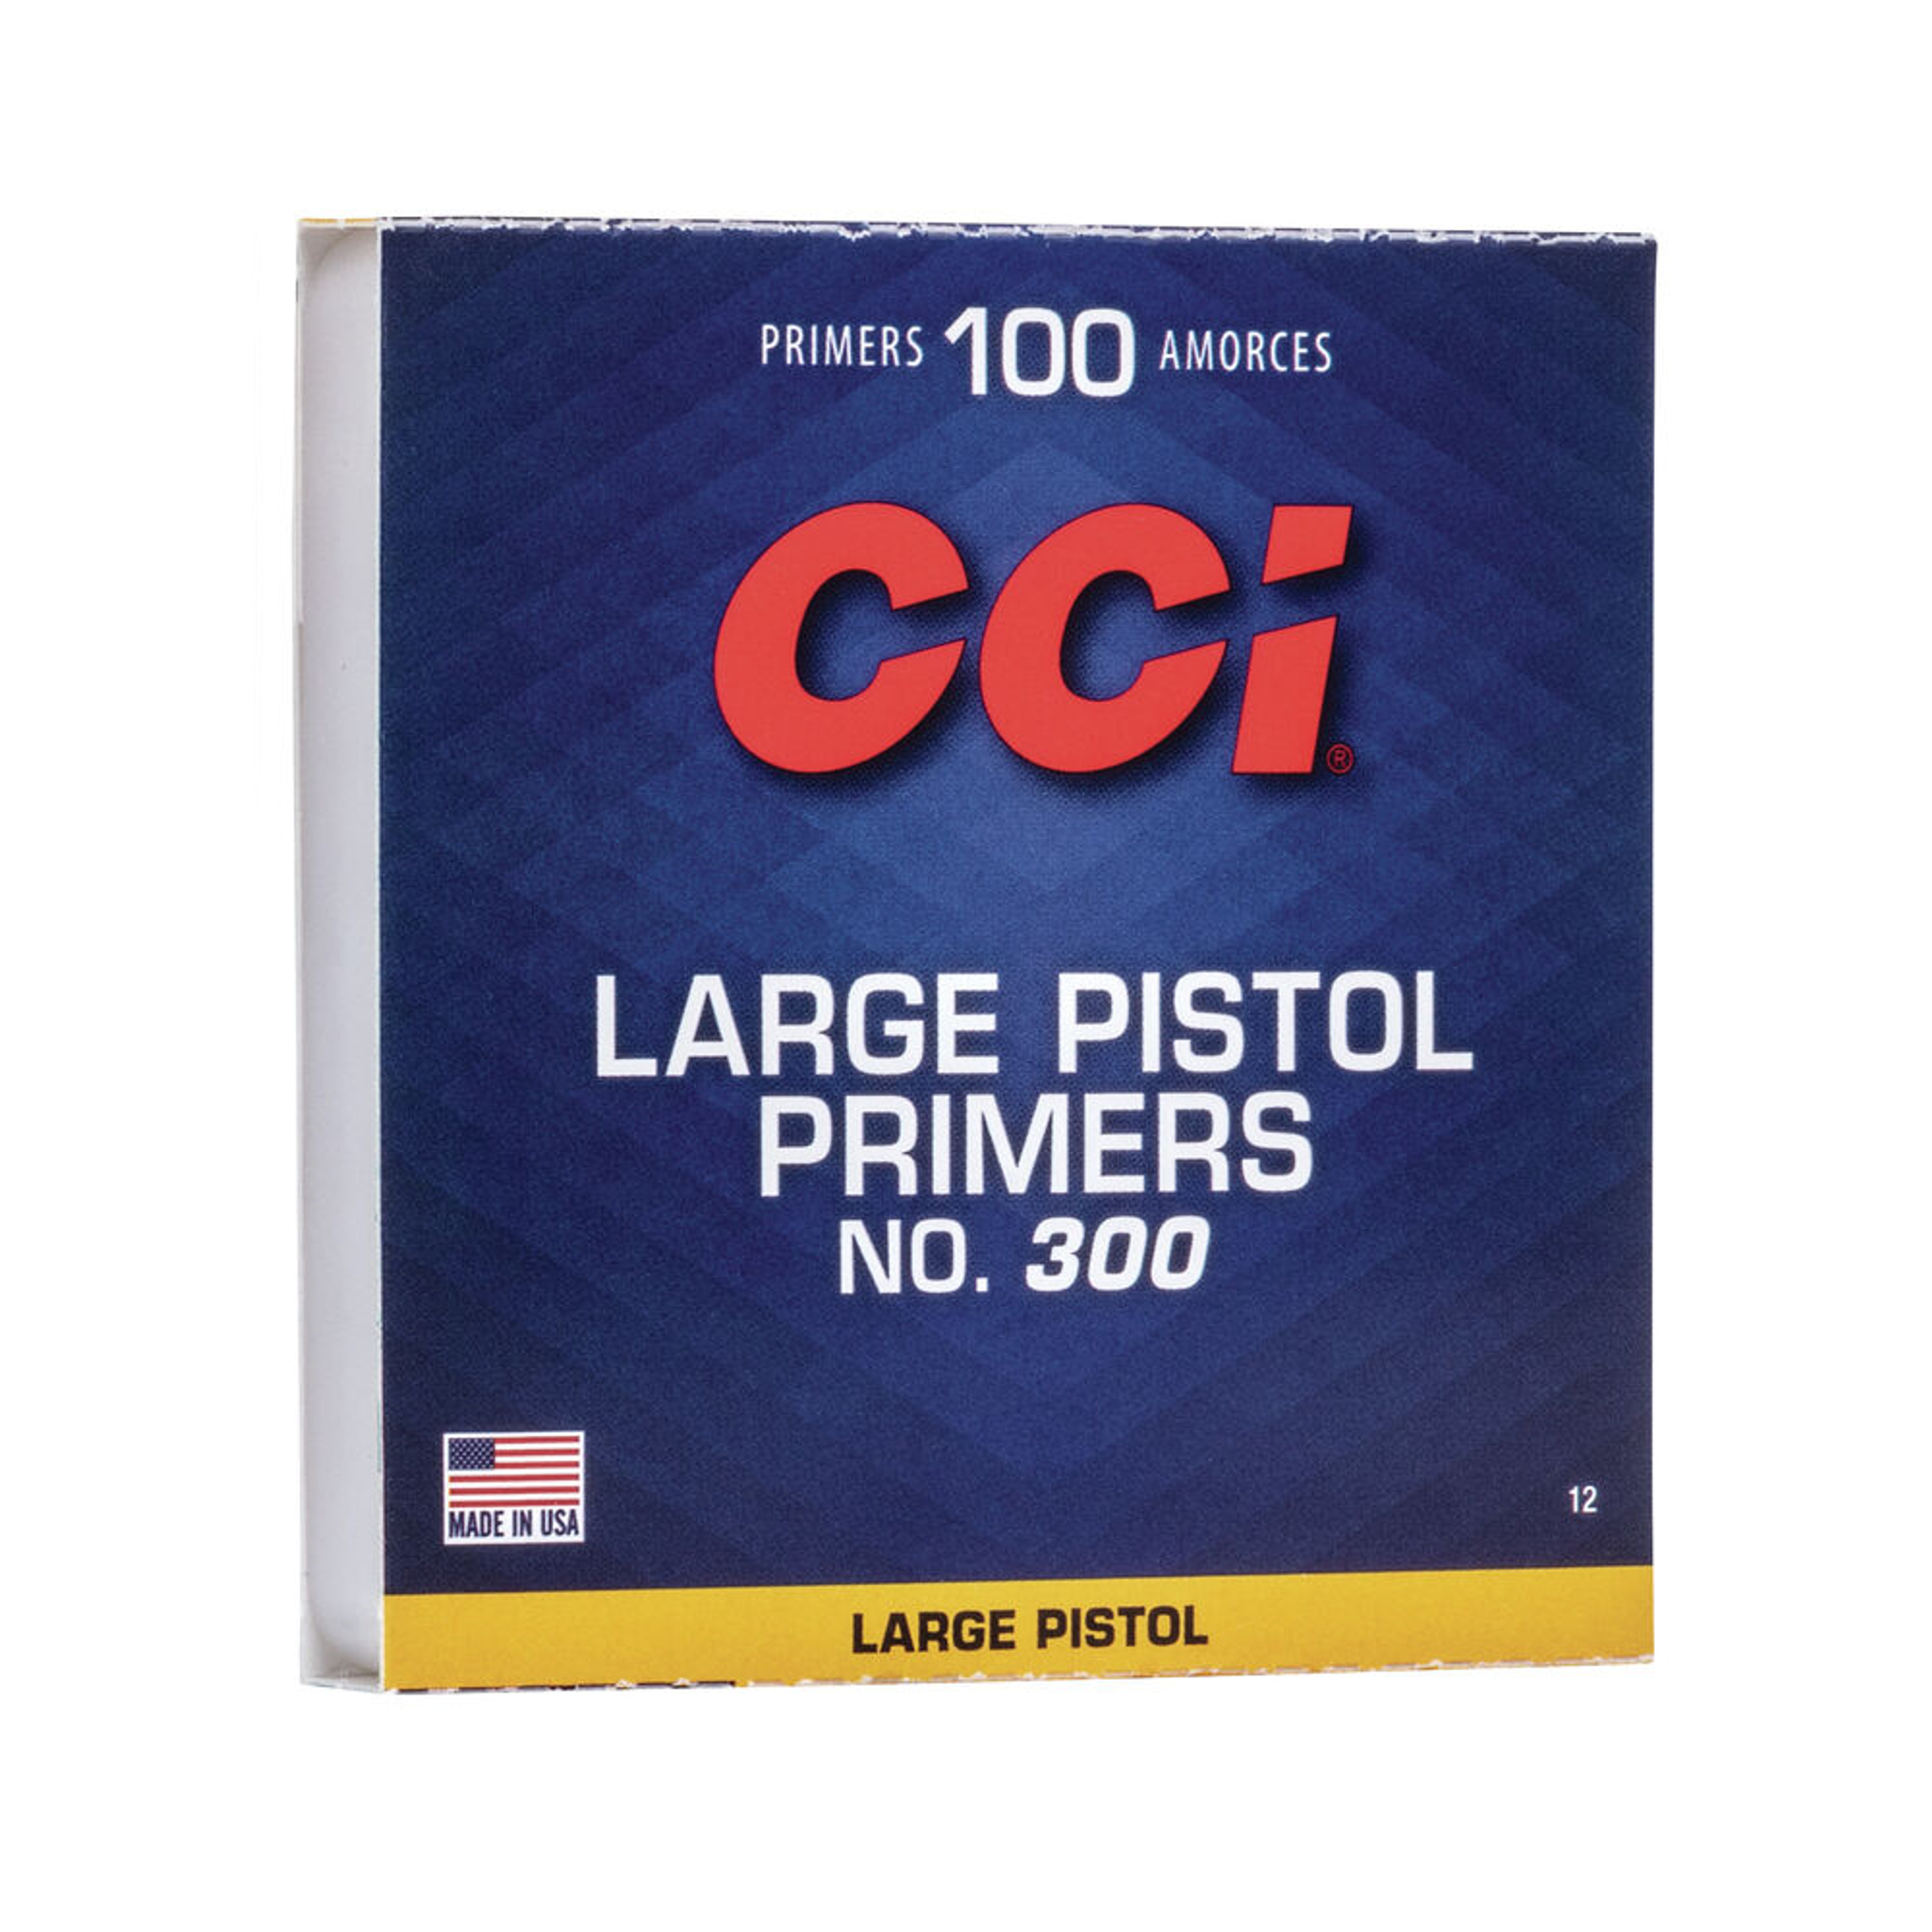 CCI 300 LARGE PISTOL PRIMERS - Heights Outdoors